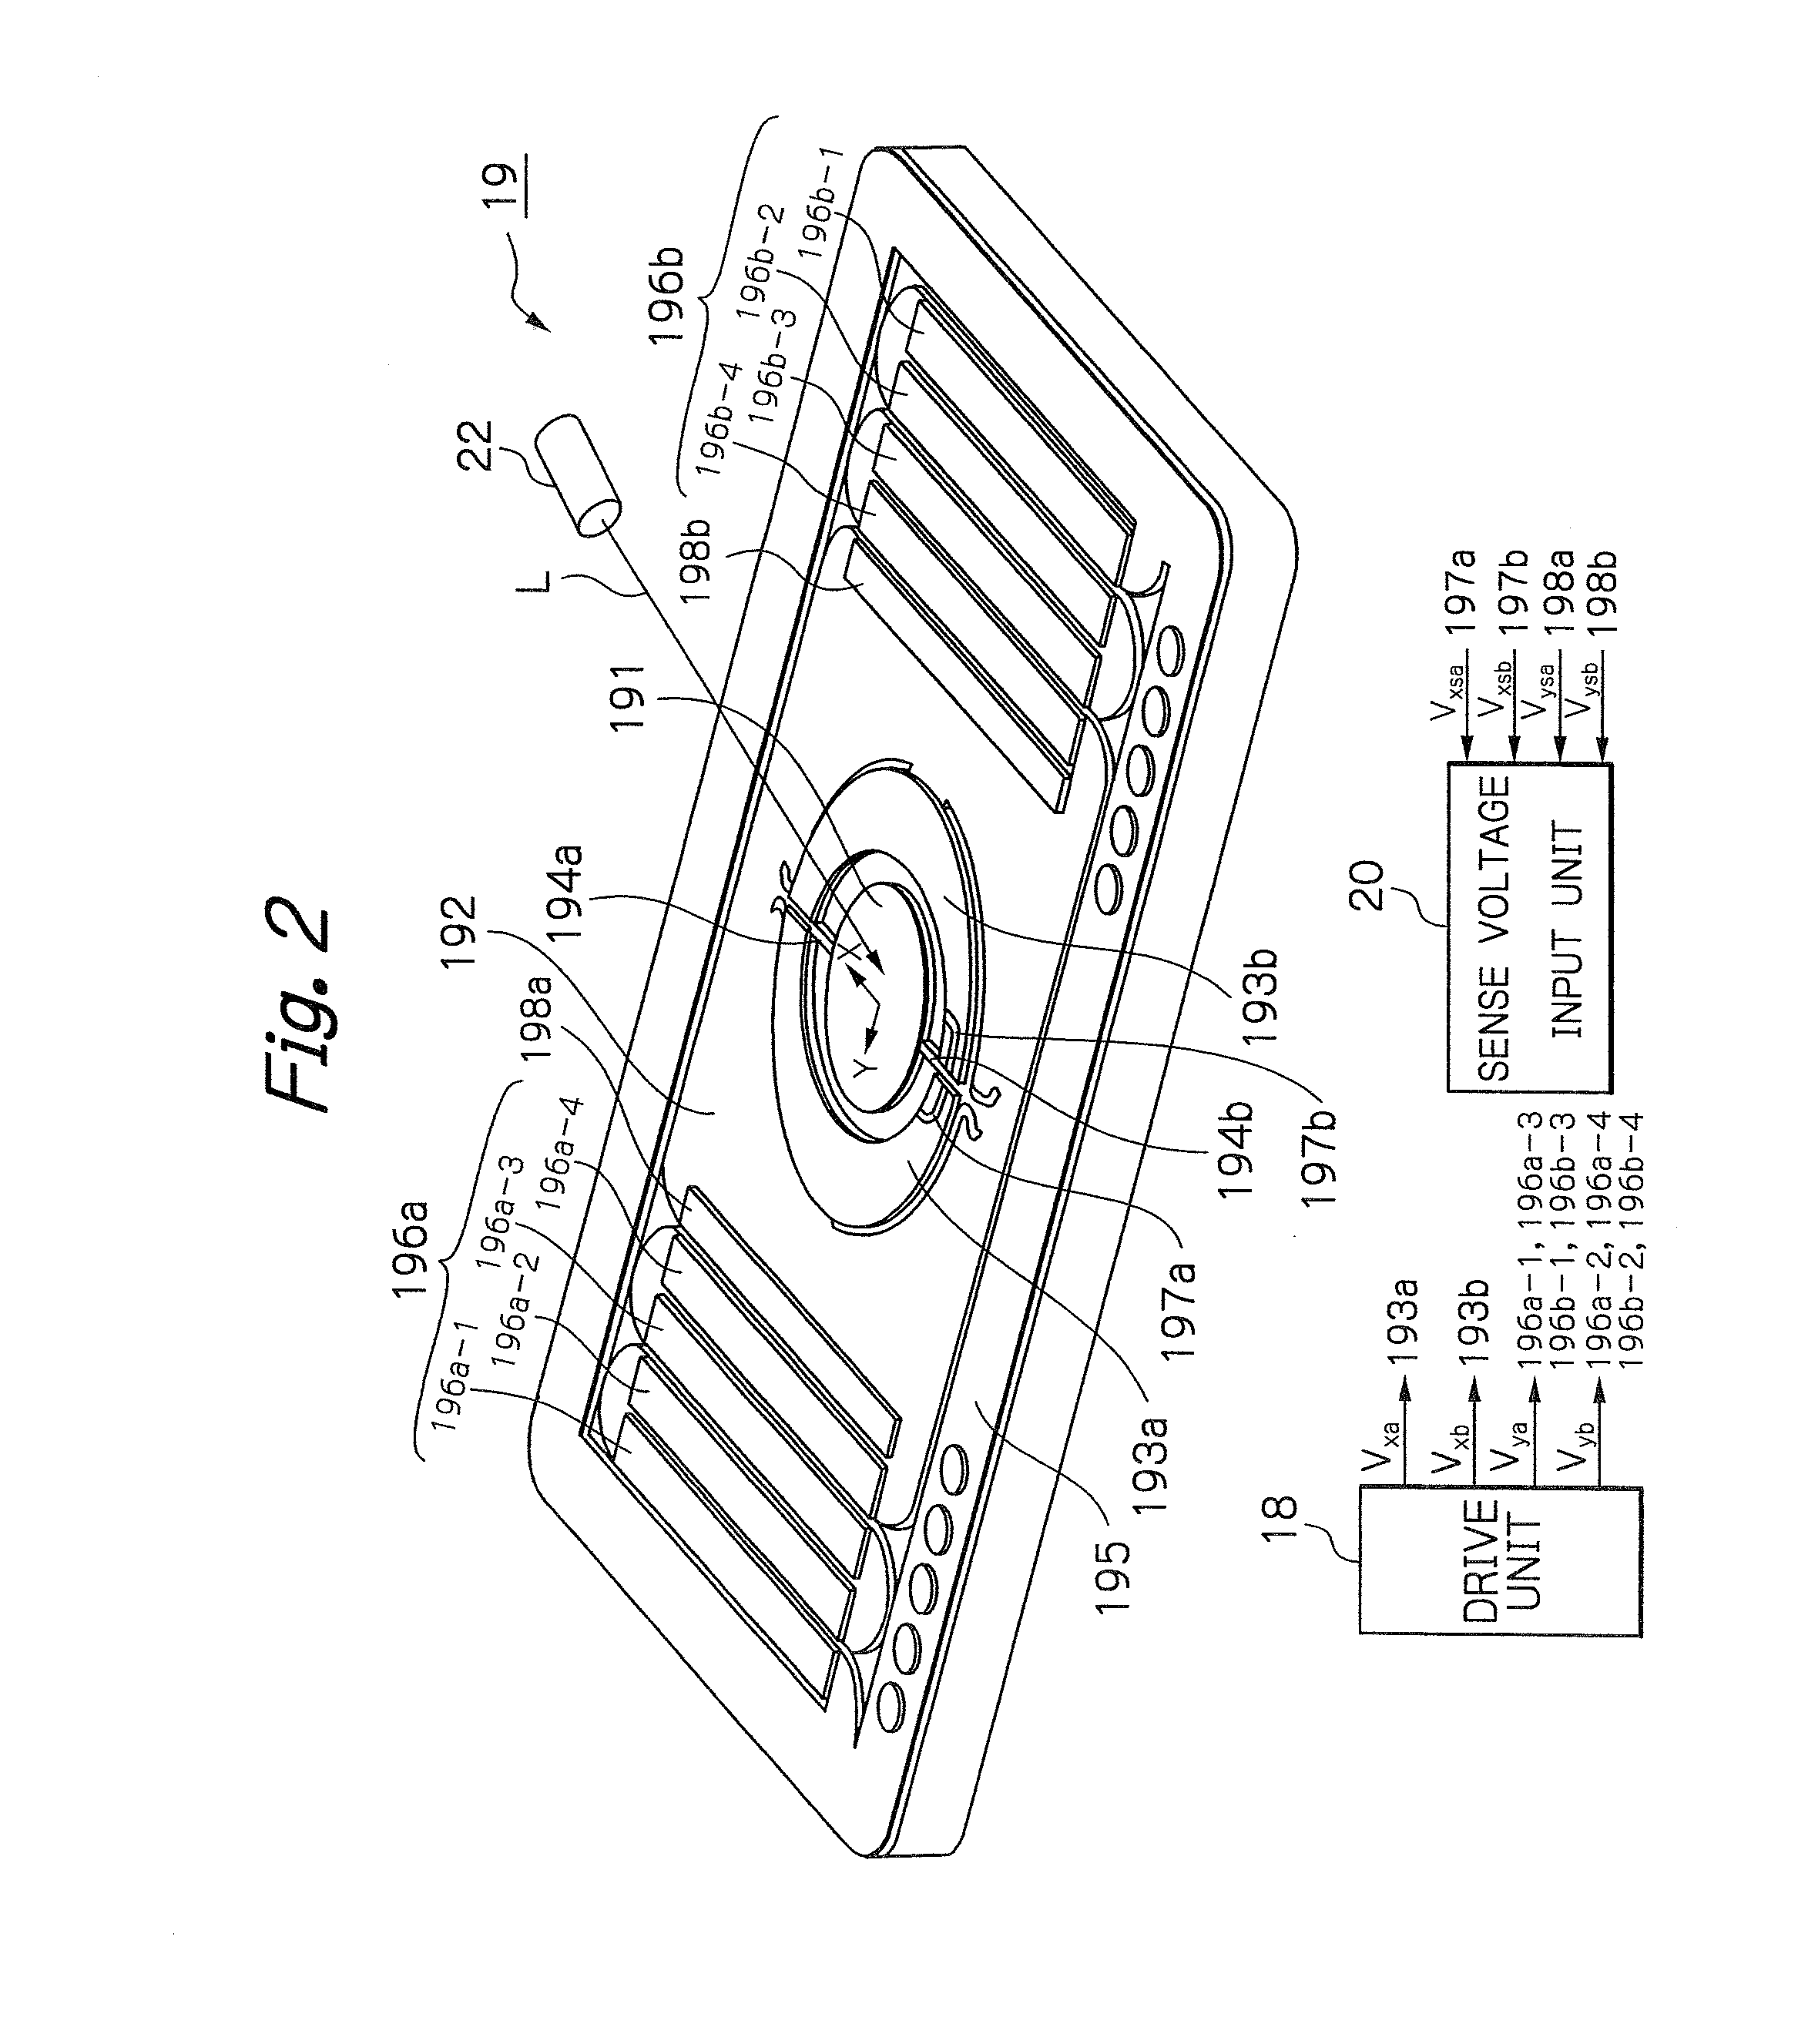 Apparatus including optical deflector controlled by saw-tooth voltage and its controlling method